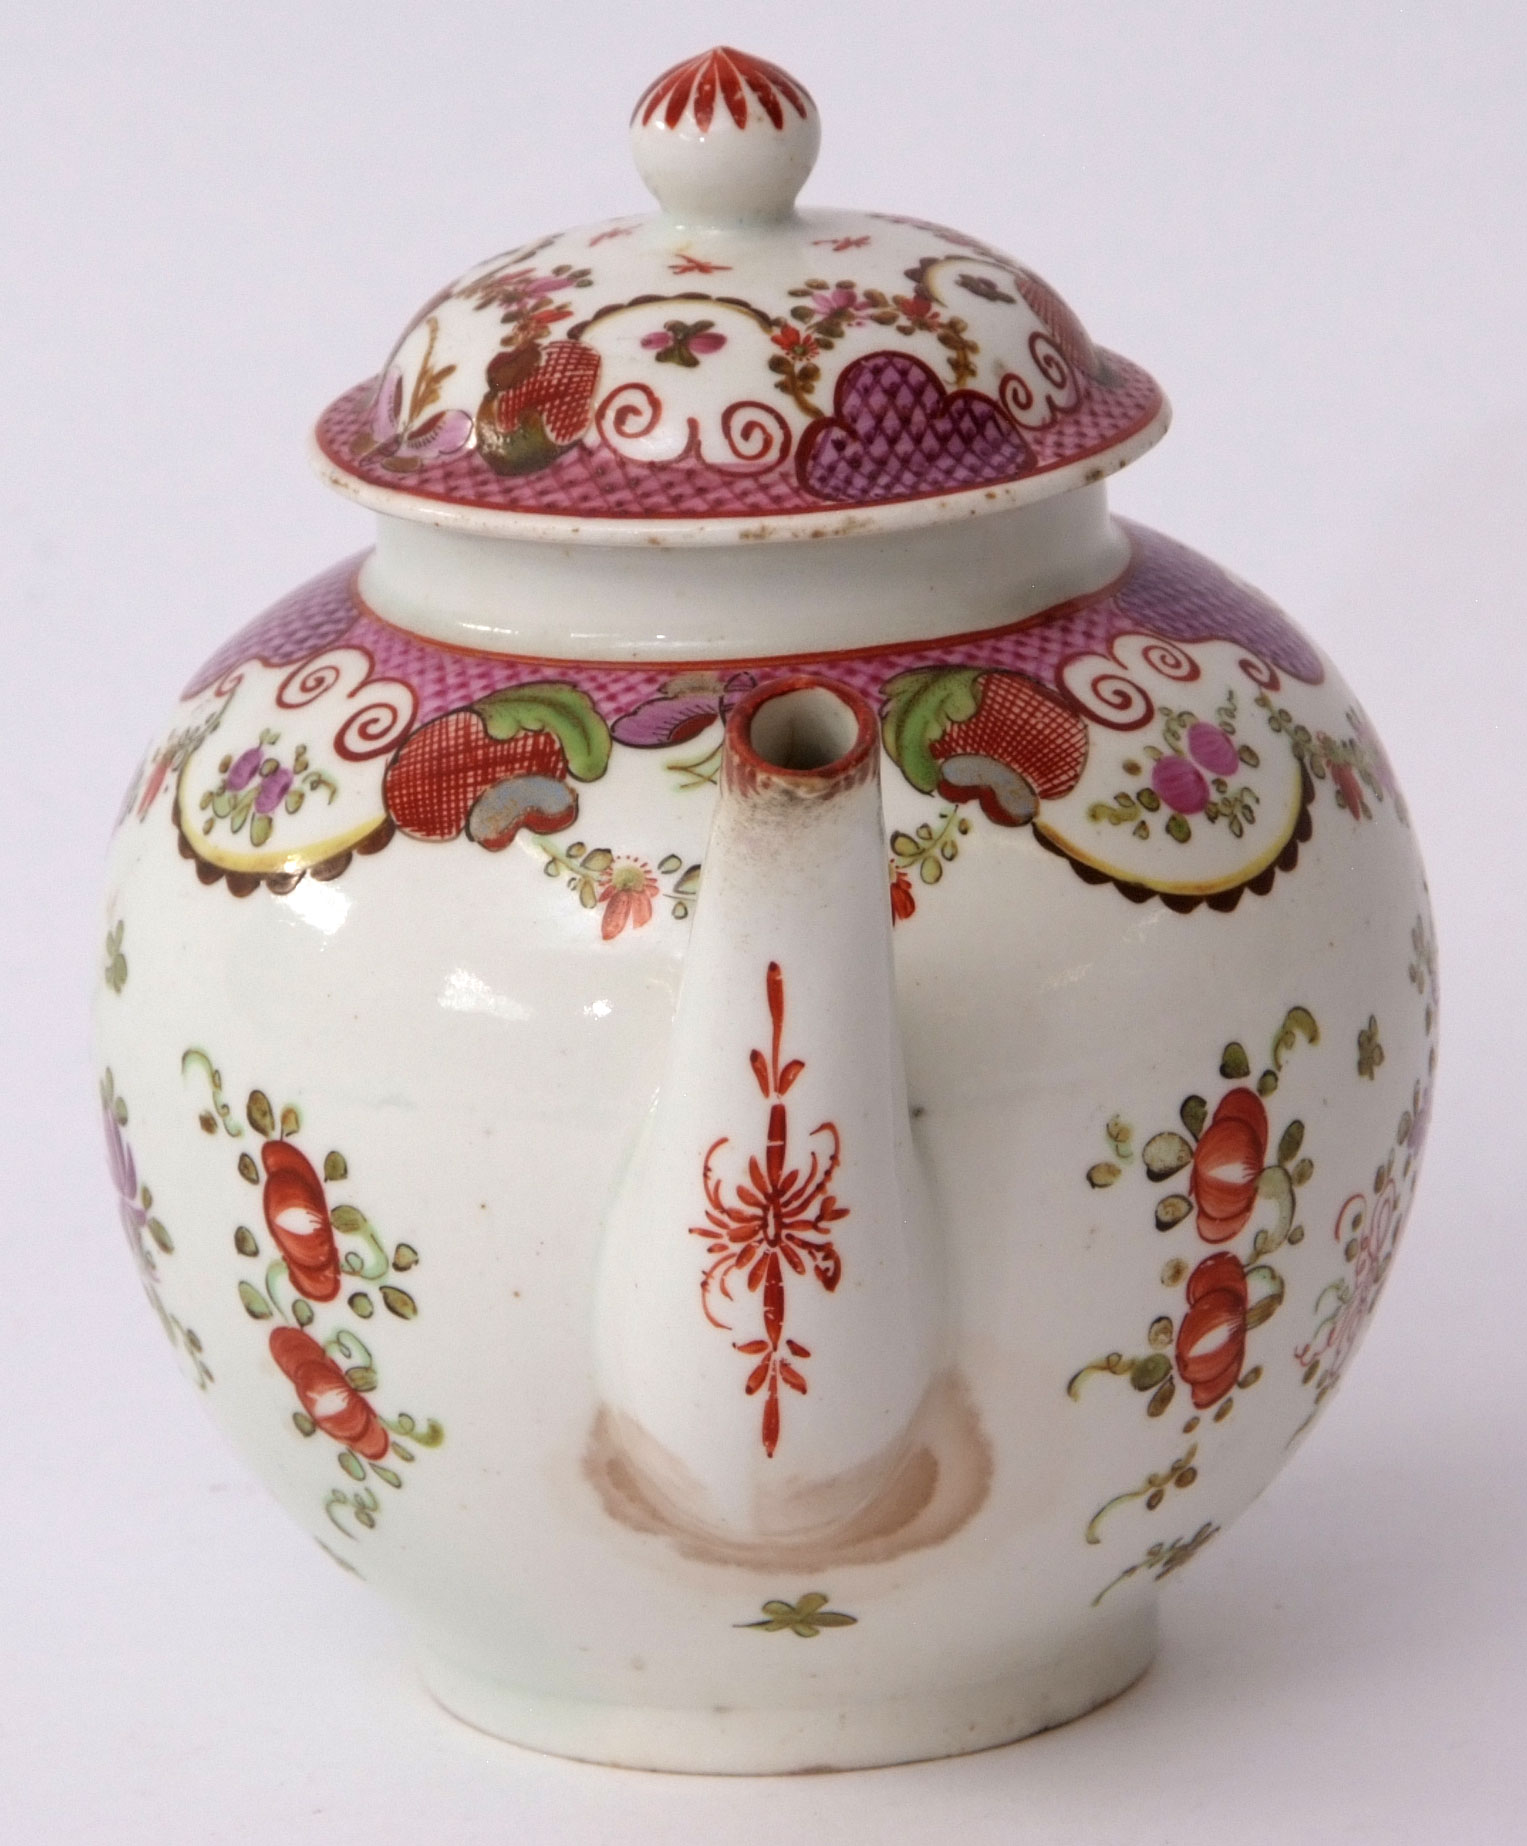 Lowestoft porcelain tea pot and cover circa 1780, decorated in polychrome with a Curtis type design, - Image 2 of 4